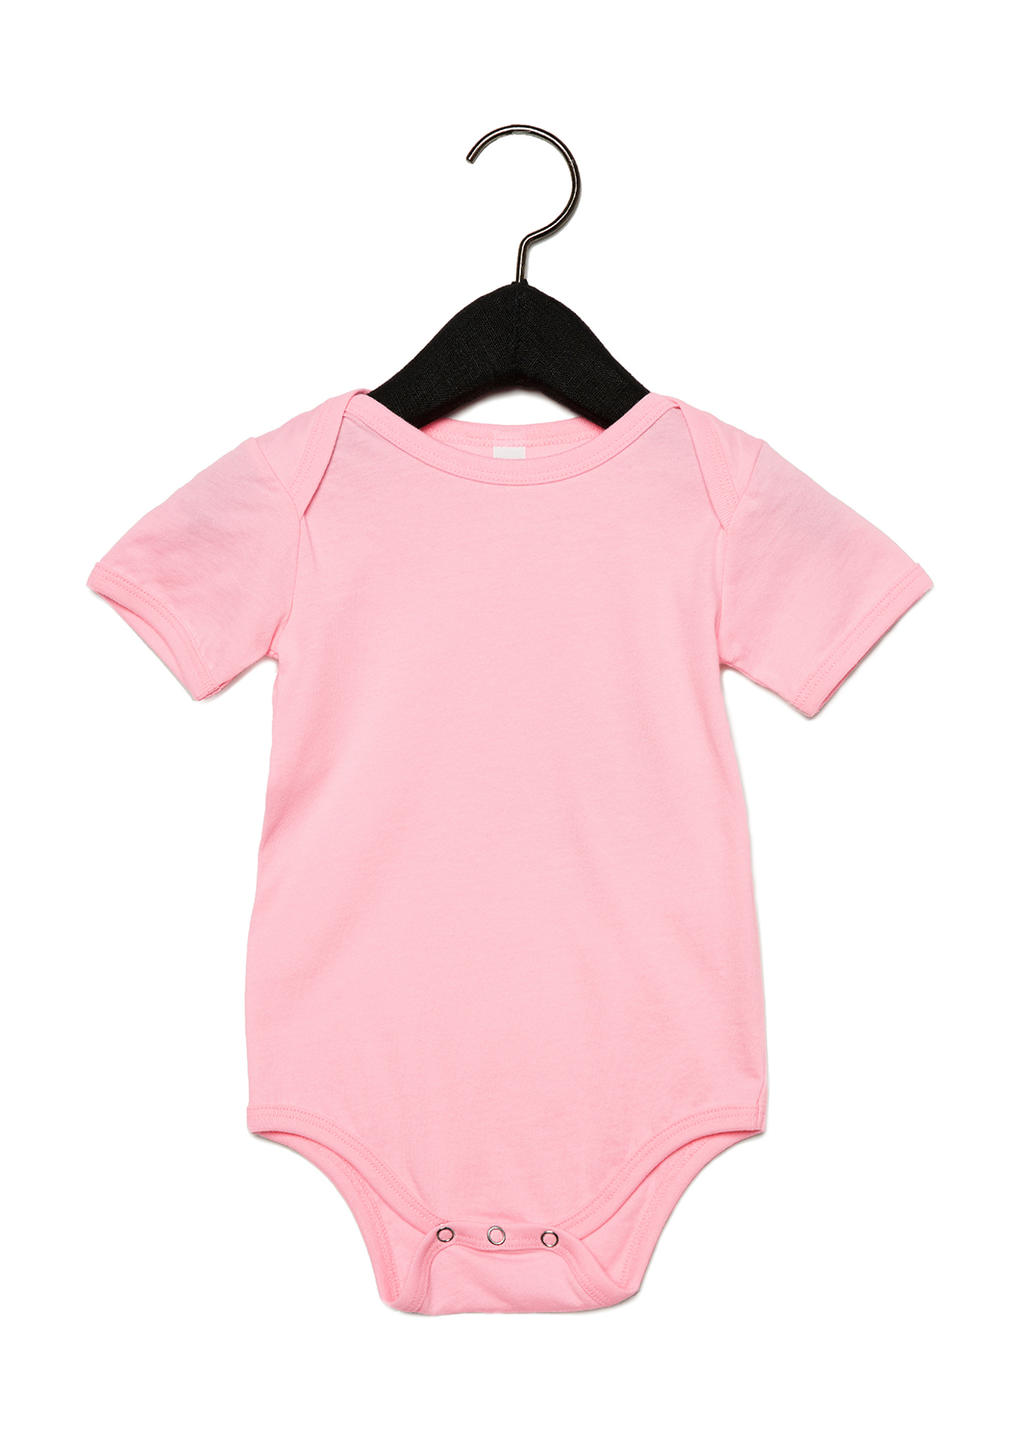  Baby Jersey Short Sleeve One Piece in Farbe Pink